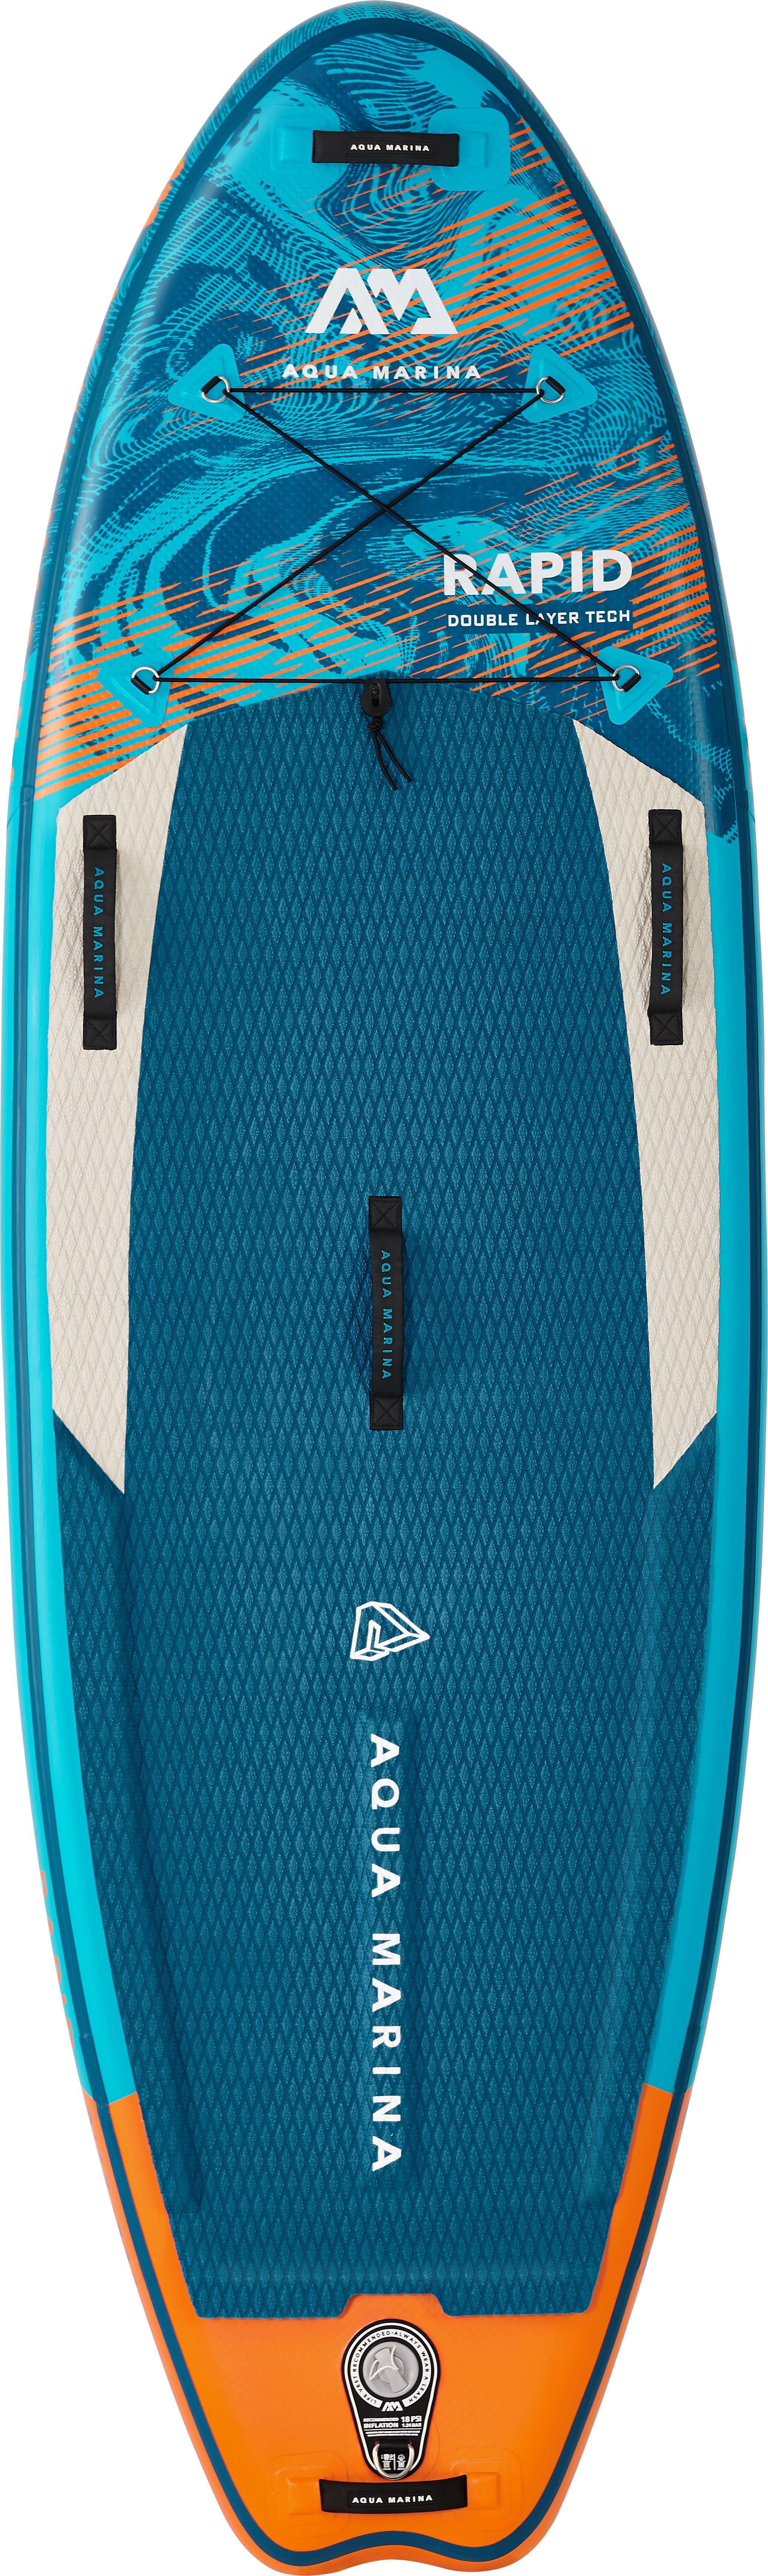 Rapid White Water iSUP Paddle Board - Dti Direct USA